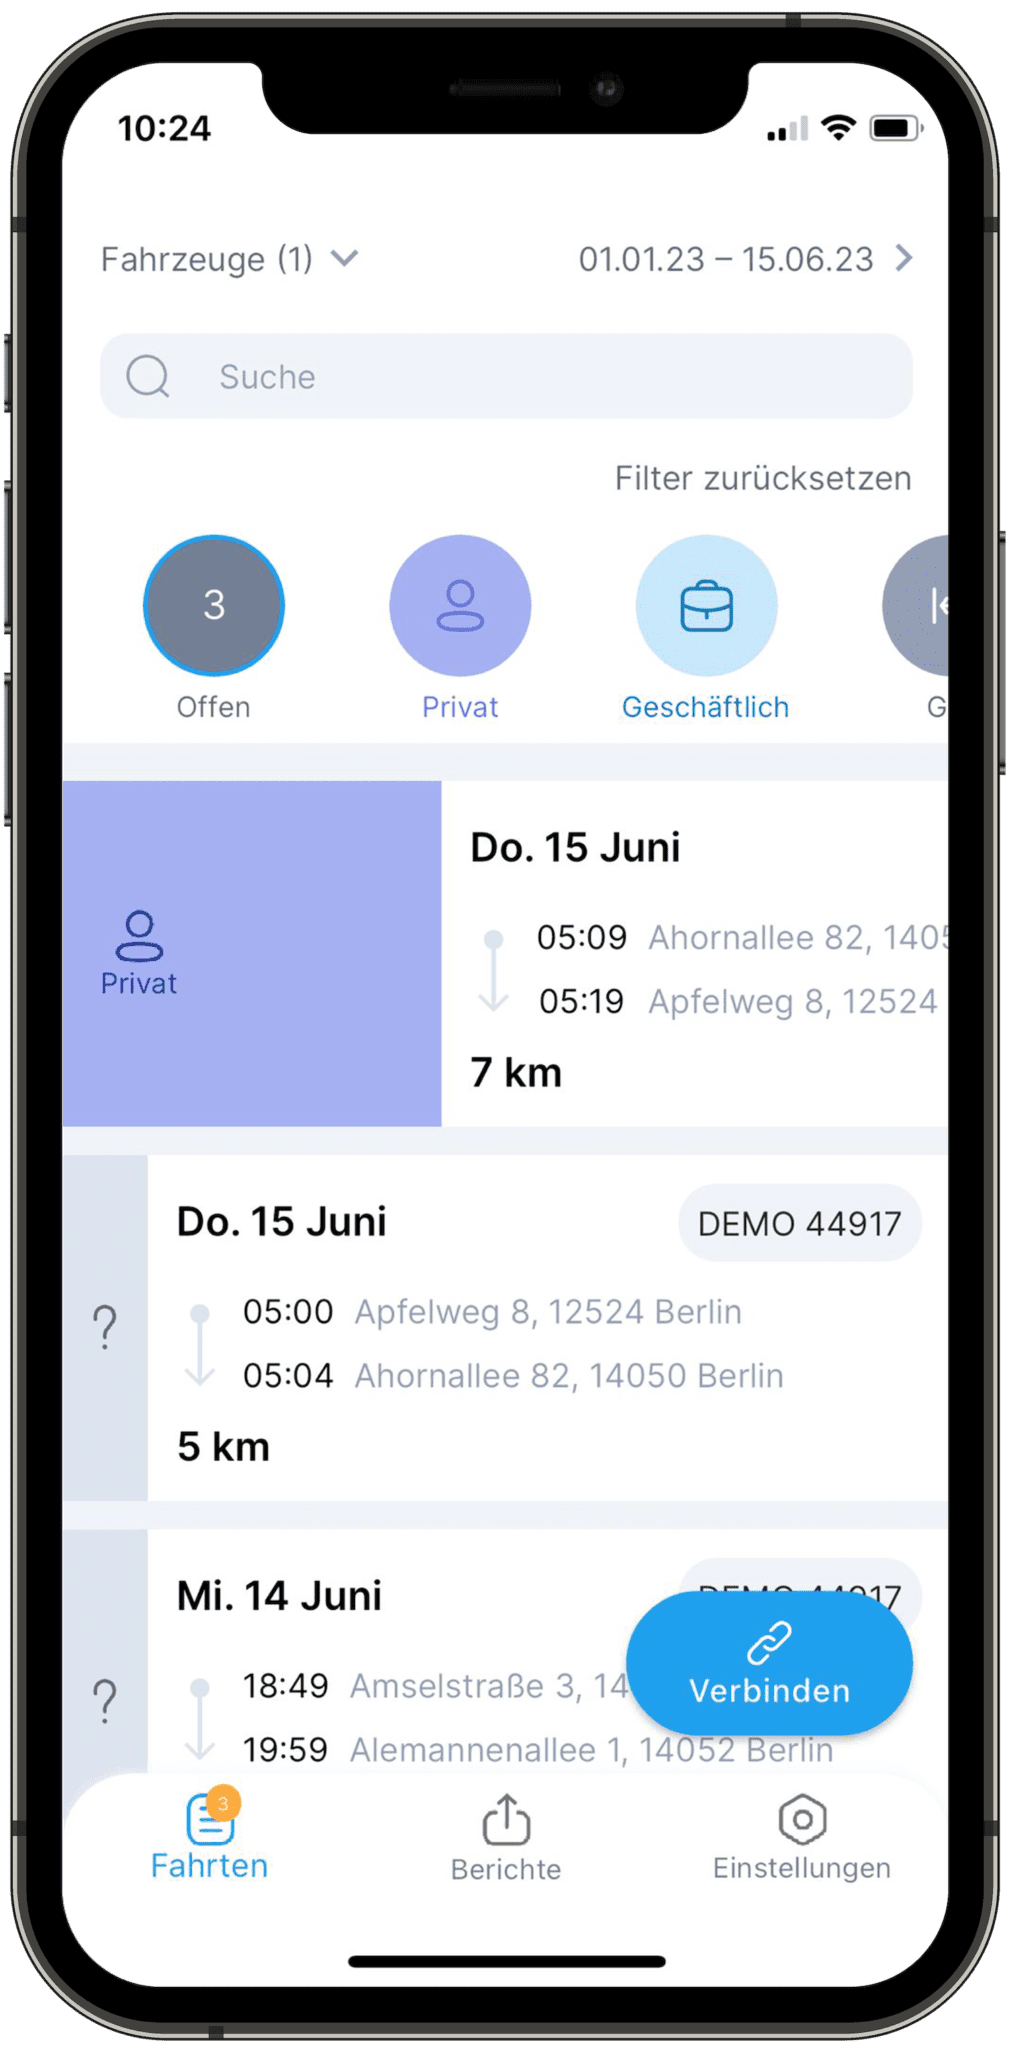 Assign private trips in the app